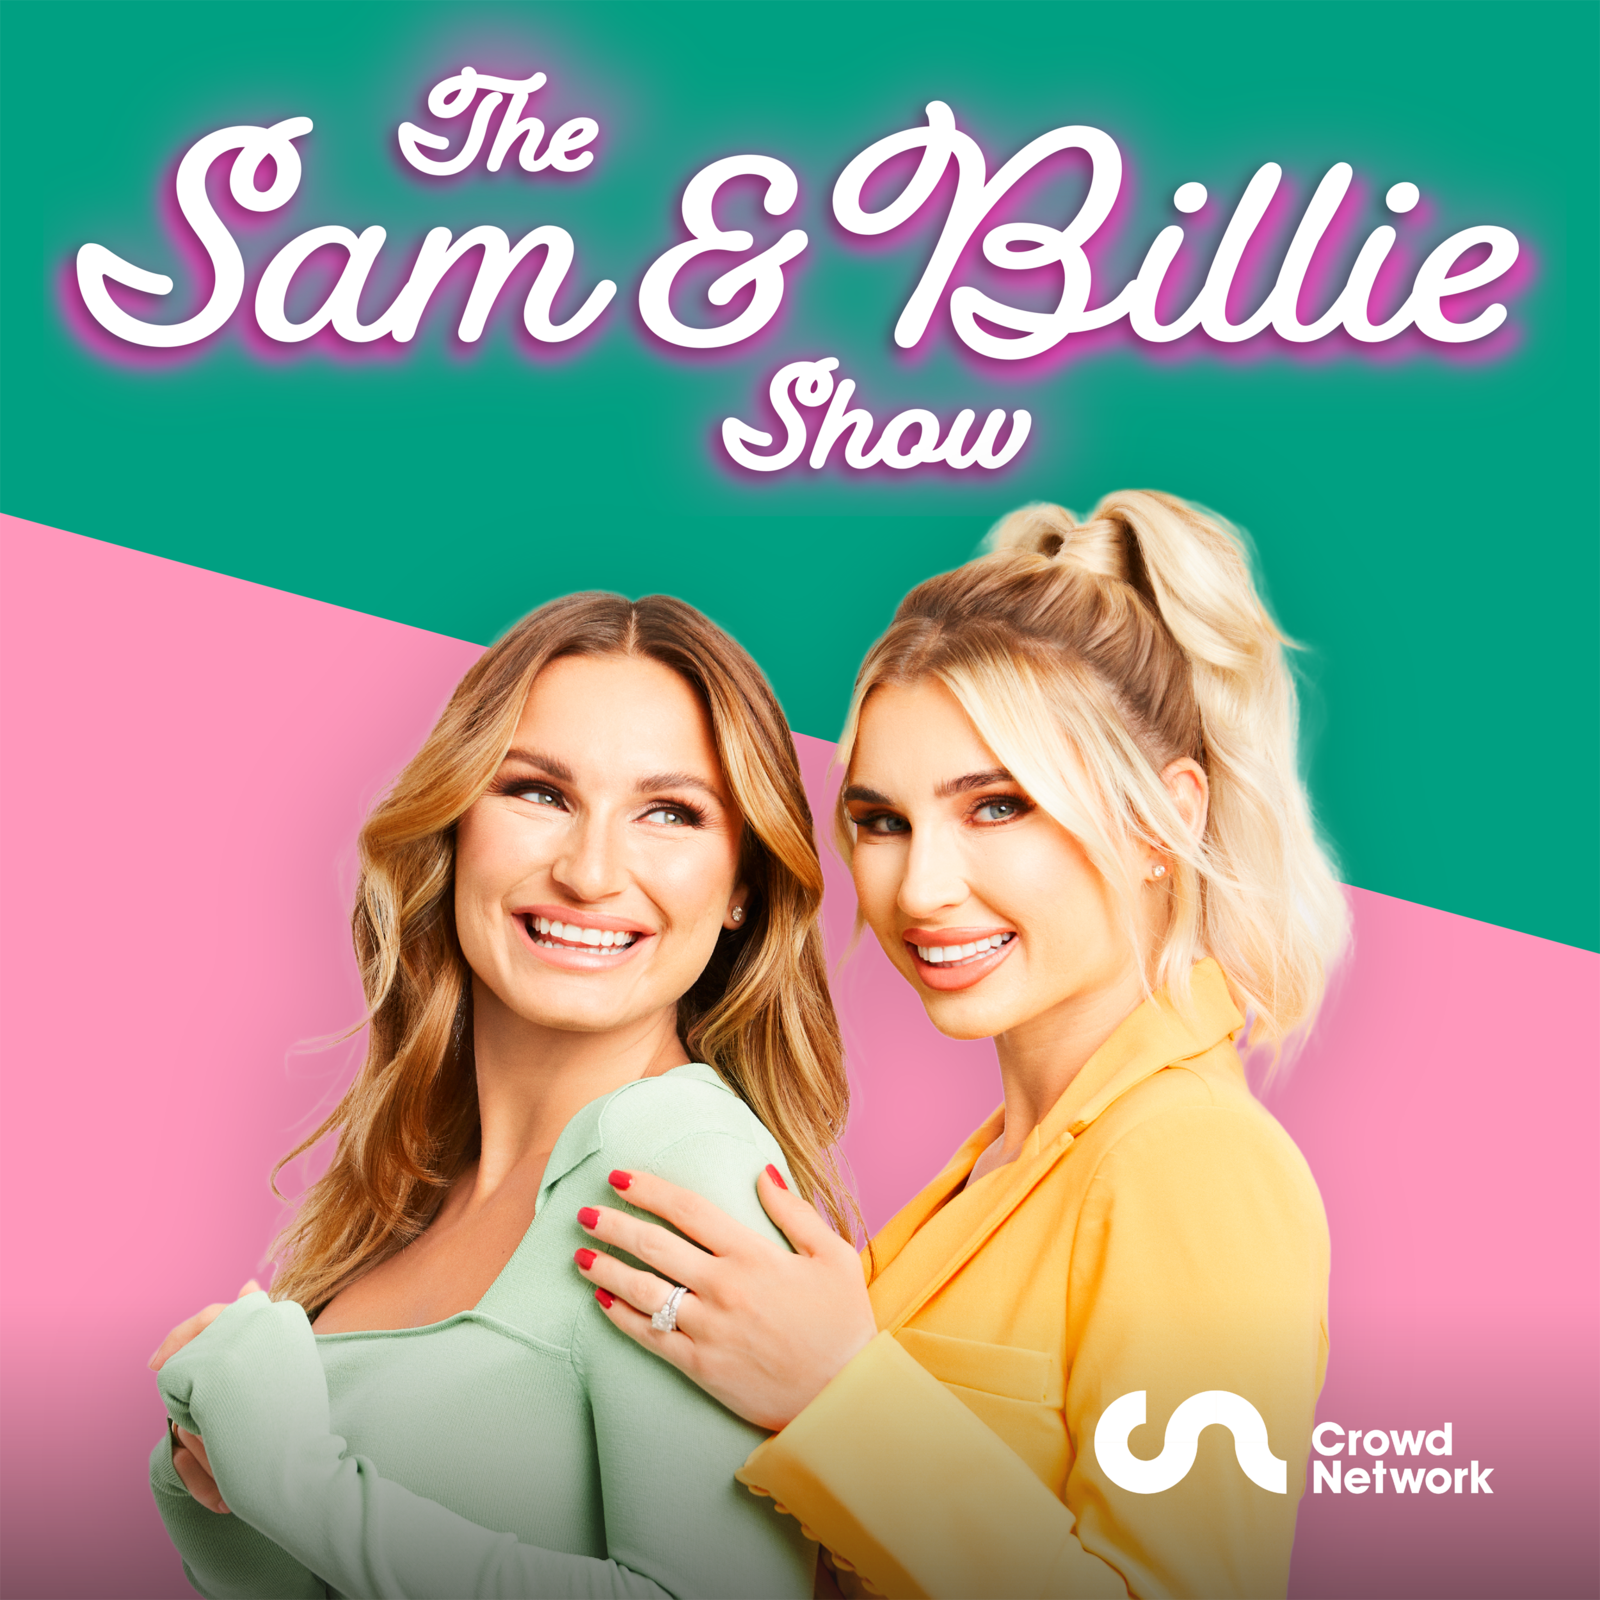 The Sam & Billie Show - Coming Soon!